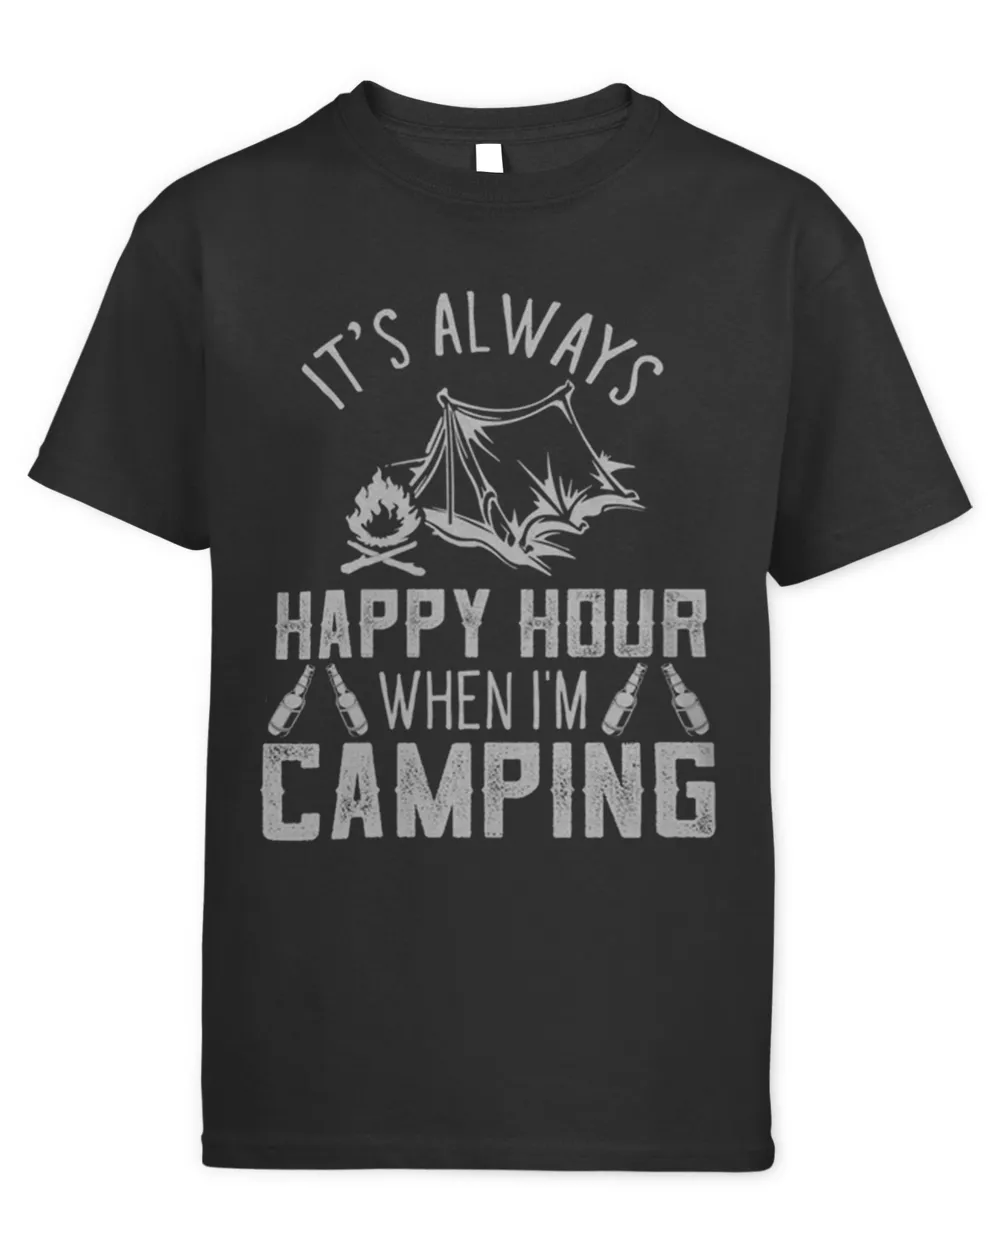 Happy hour when camping